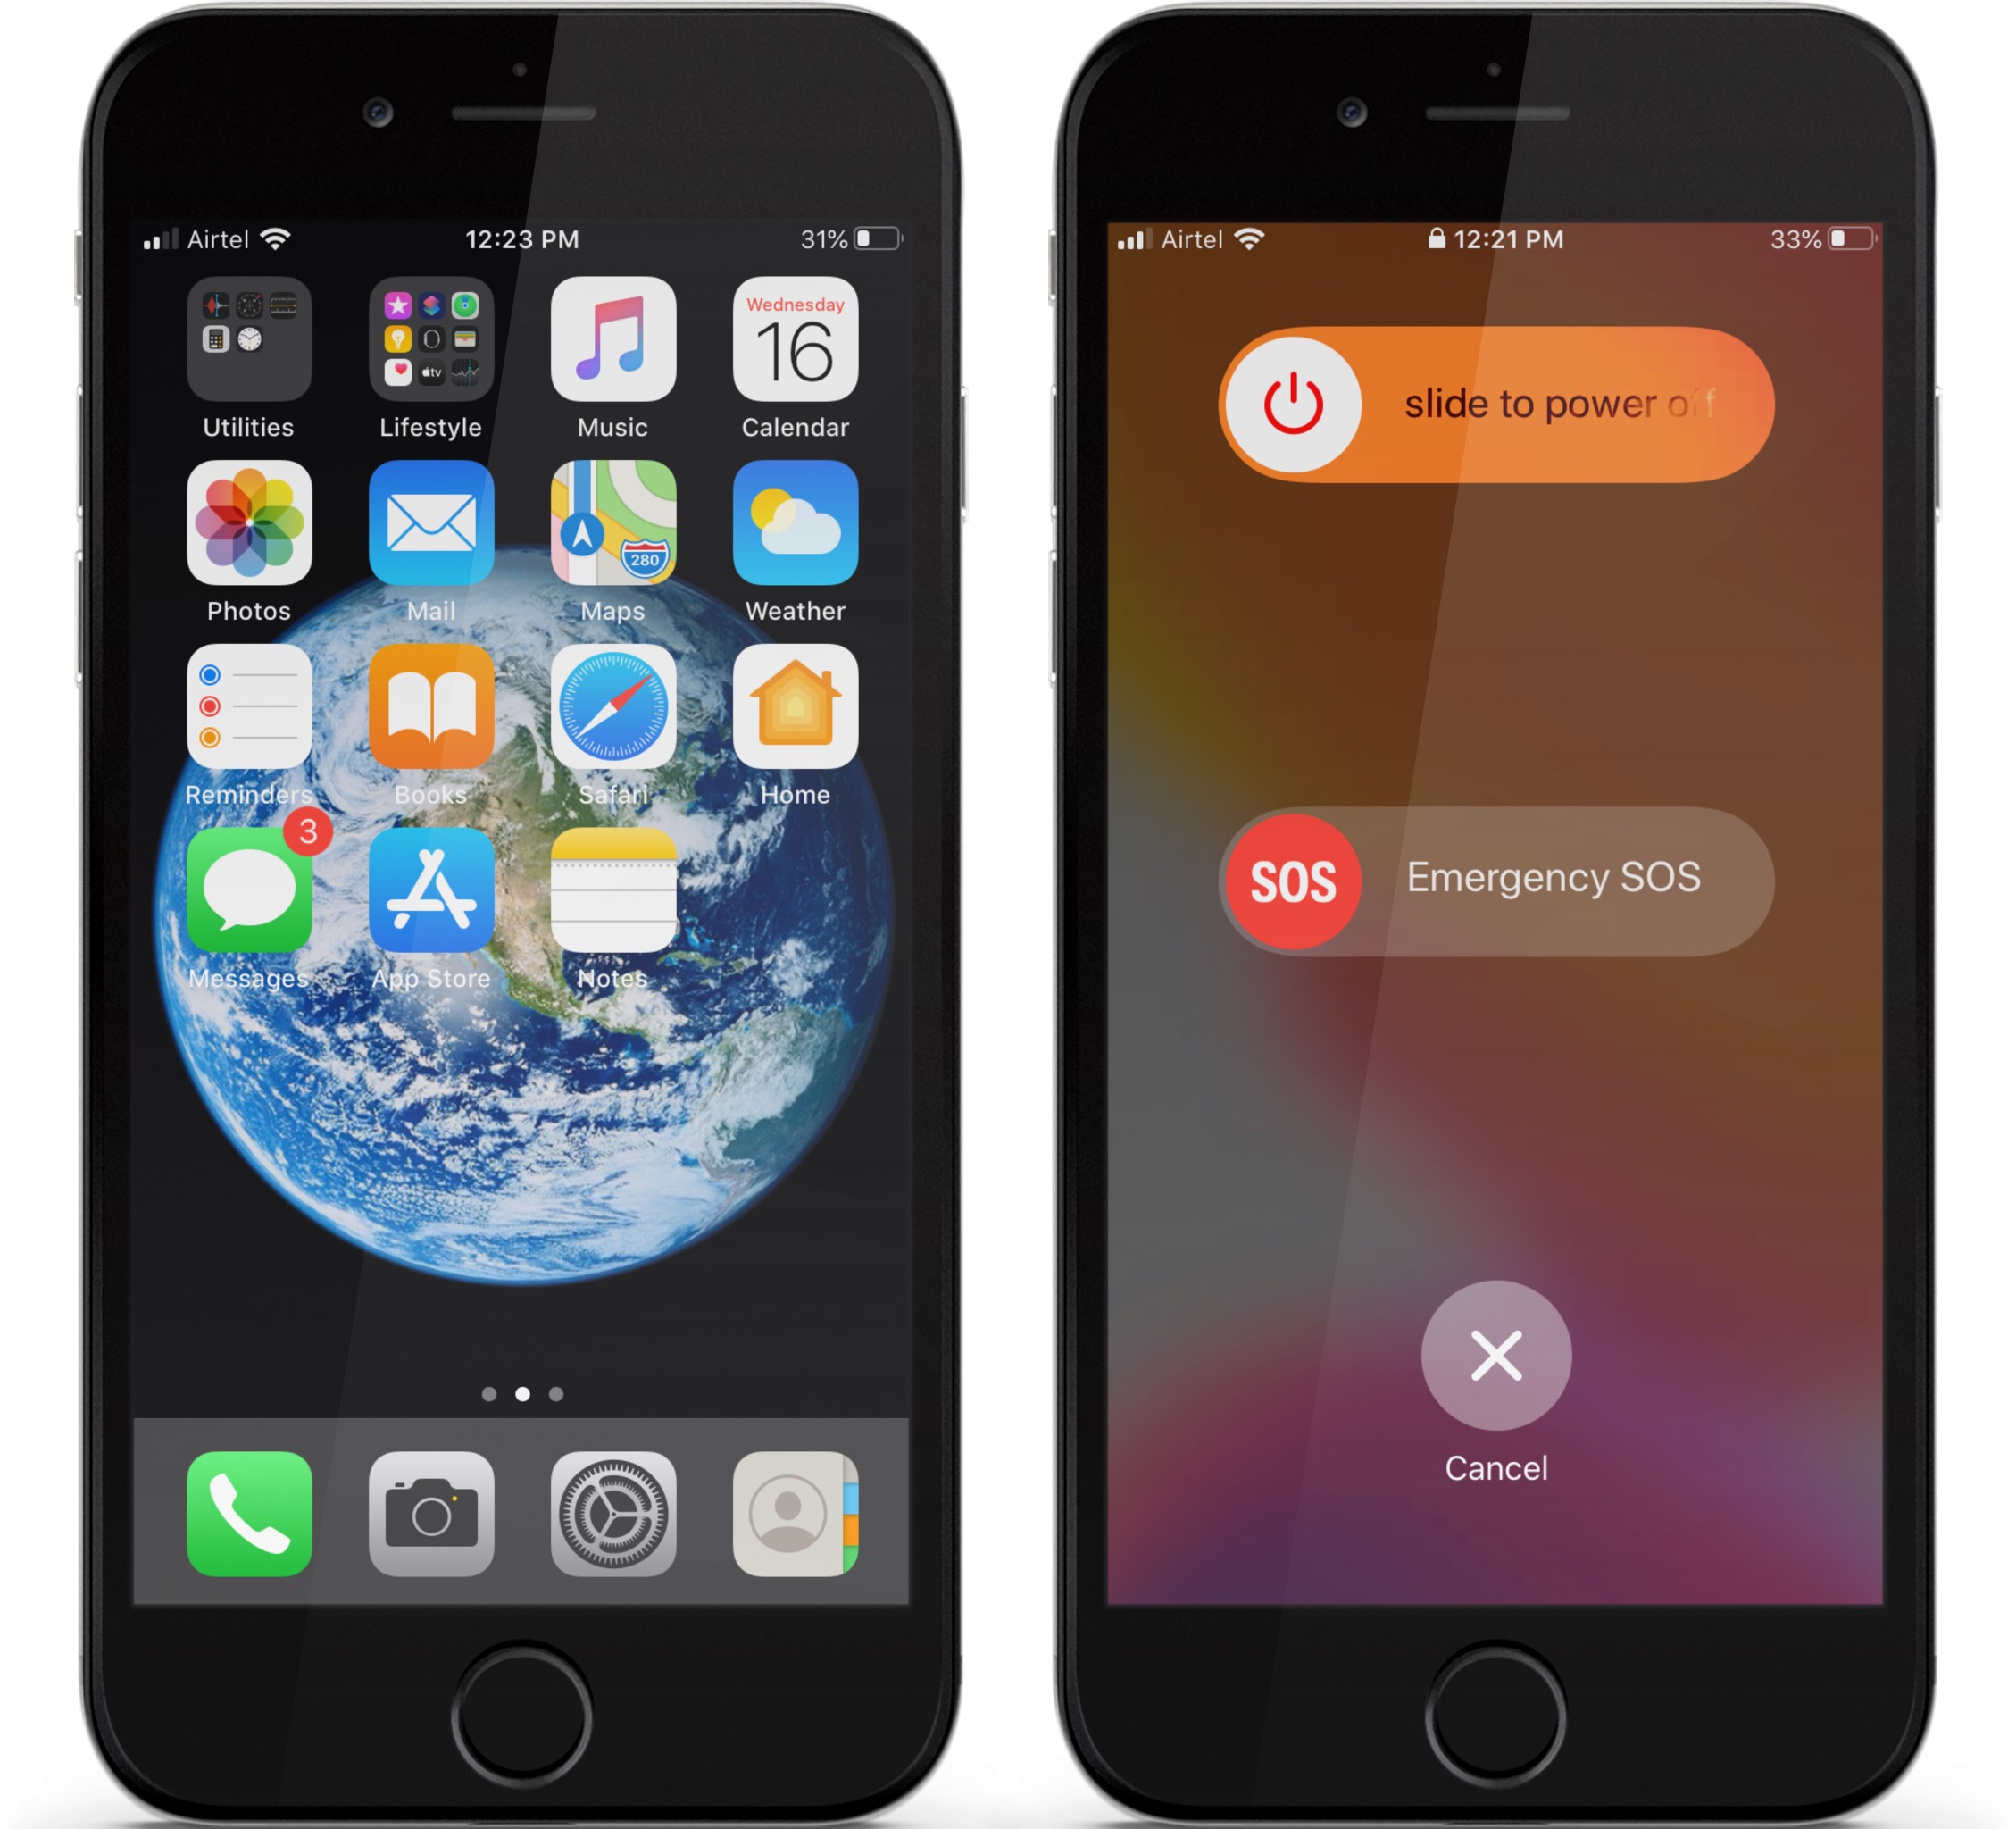 drag emergency sos slider to call emergency services on iphone 7 or earlier